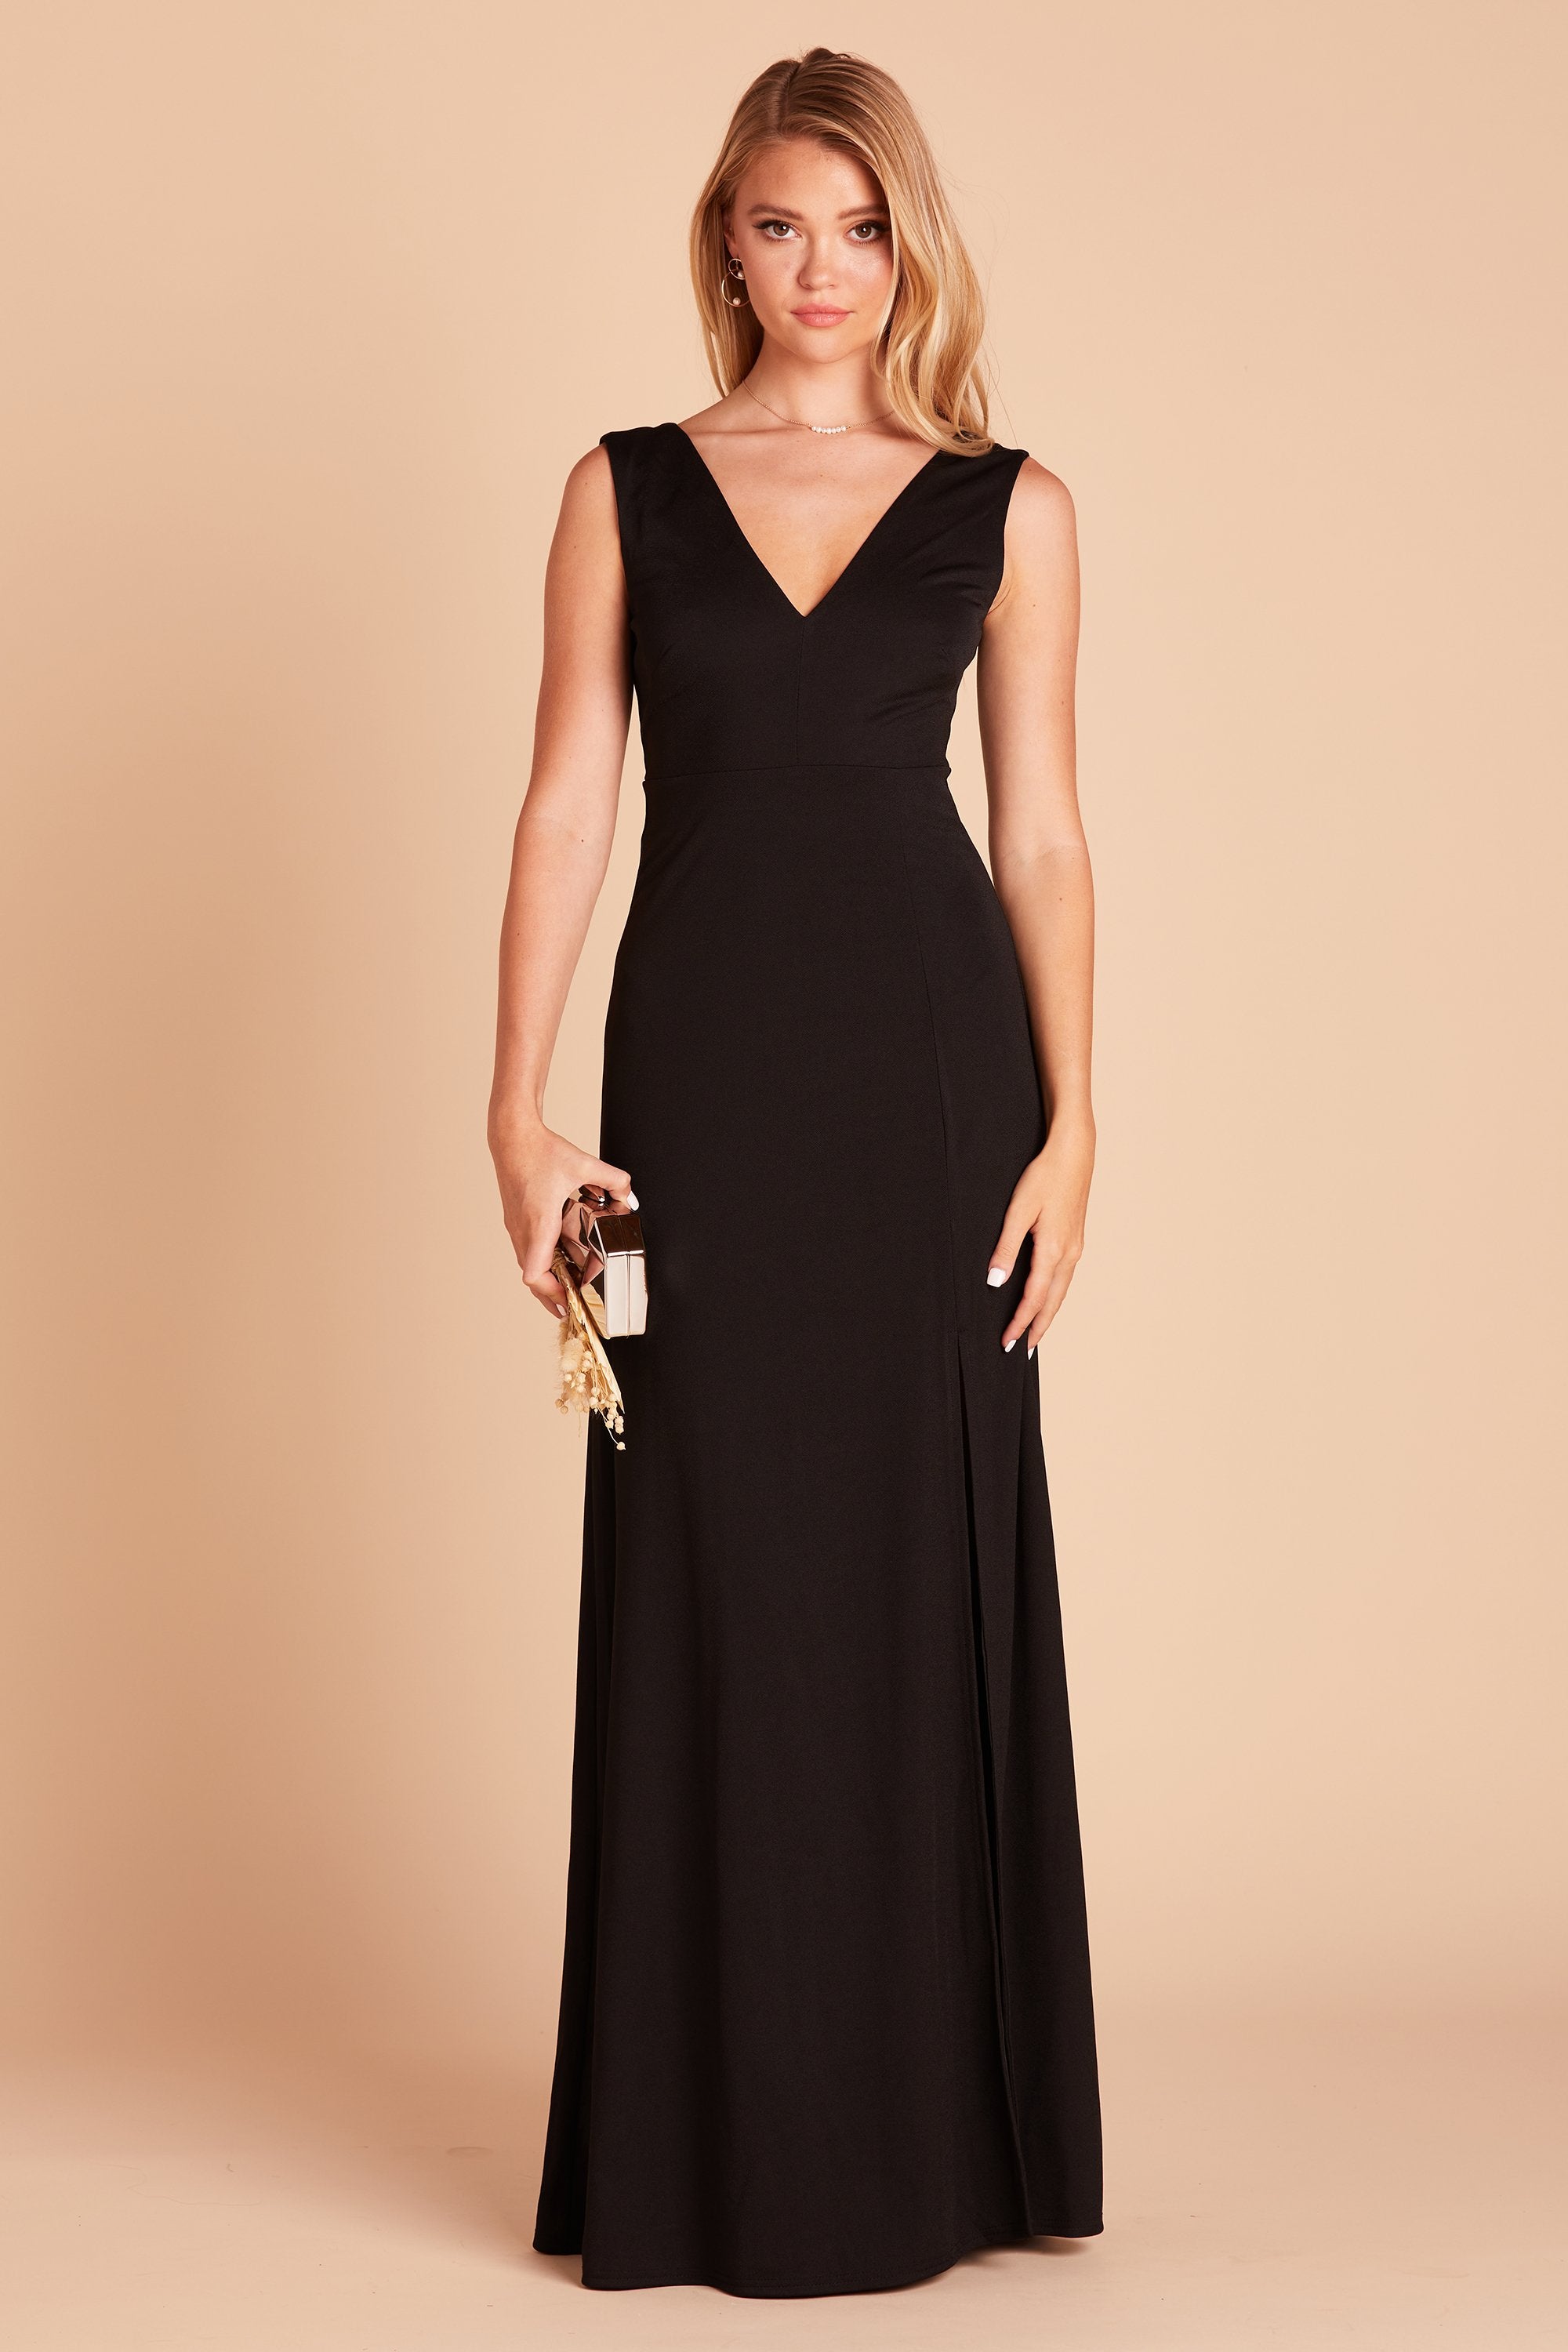 Shamin bridesmaid dress in black crepe by Birdy Grey, front view